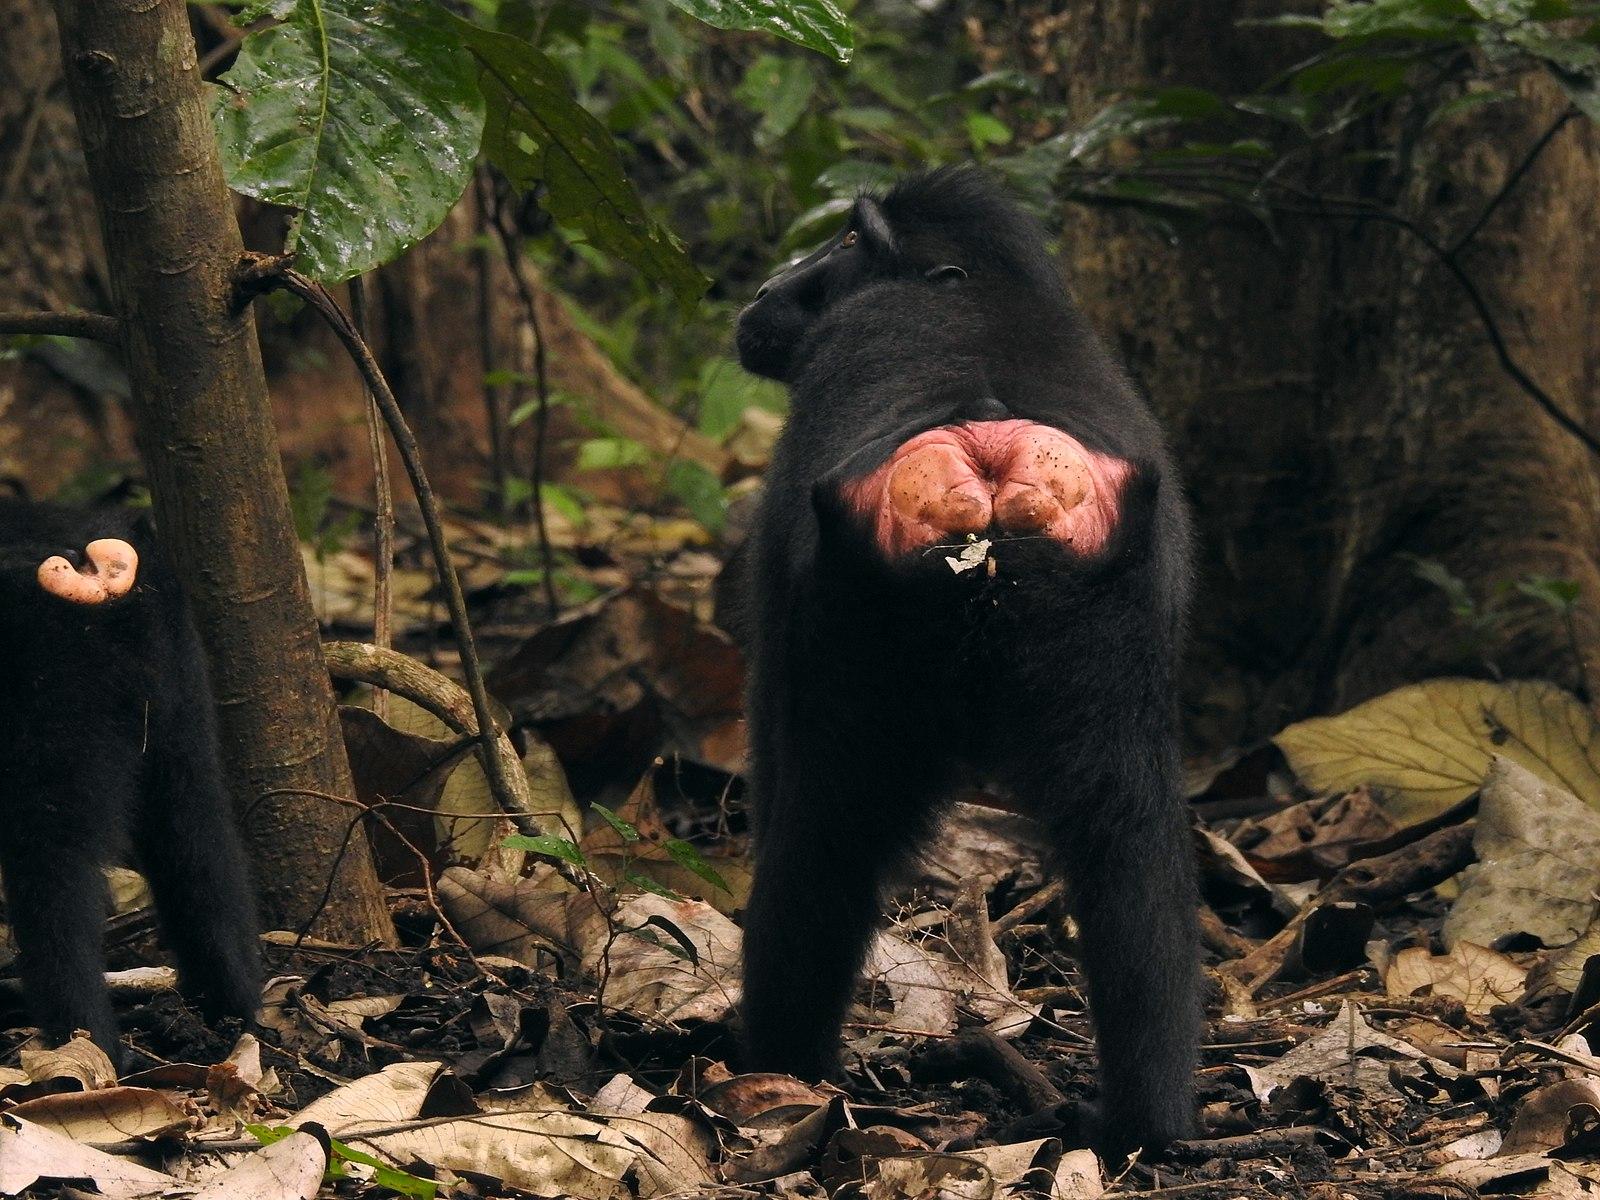 Pinkish ischial callosities on a crested black macaque.